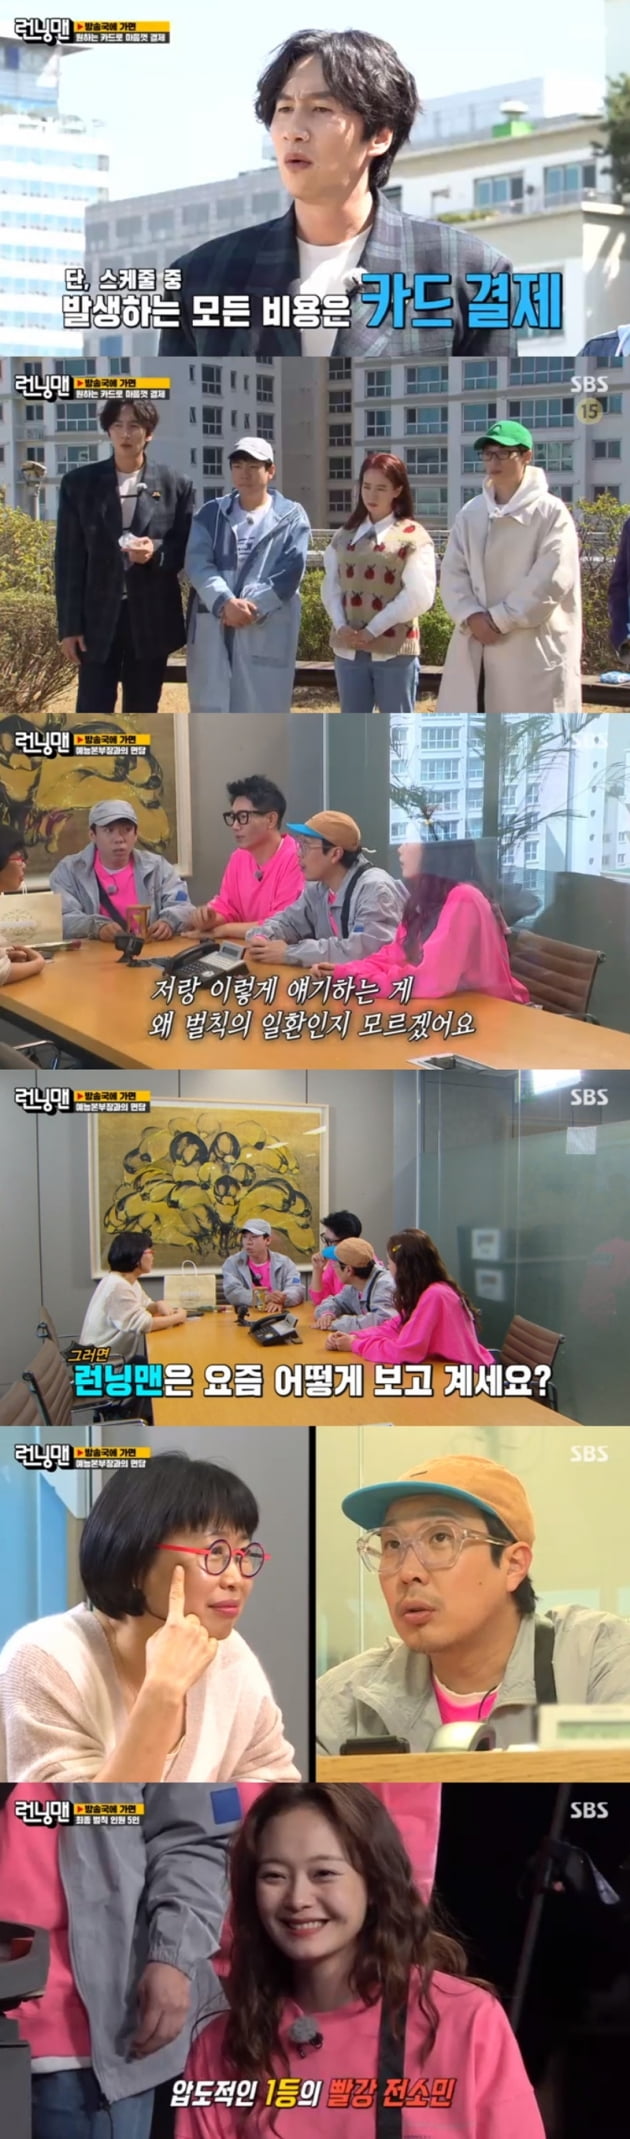 Running Man members made endless laughter inside the station.On SBS Running Man broadcasted on the afternoon of the 9th, a special feature was drawn.From the first Jeon So-min, the opportunity to write the members card was given.The members used their own card to present coffee, cookies, etc. to the staff at the cafe.In particular, Ji Suk-jin ordered a lot of beverages from the cafe with his best friend Yoo Jae-Suks card and scratched a whopping 184,000 won.Lee Kwang-soo used Kim Jong-kooks card, saying, Kim Jong-kook actually likes to give to juniors and does not feel bad.The full-scale game began, the first round was Jungles Law; Yoo Jae-Suk, who had the most card spending in the cafe, had the decision to team up.Yoo Jae-Suk teamed up with Kim Jong-kook, Lee Kwang-soo and Song Ji-hyo and Ji Suk-jin, Haha, Jeon So-min and Yang Se-chan became a team to install base camp tents and chairs.Yang Se-chan was named as the number one passionate member of VJ who participated in all the shootings of Jungles Law.Yang Se-chan was able to pay 300,000 won for camping equipment with someones card, and Yang Se-chan chose Ji Suk-jins card.In the second round of the Alley Restaurant, it was divided into chicken and skewer teams.In the third round, a member who seems to communicate well viewer vote was held, and the bottom four were scheduled to meet with SBS Entertainment general manager.The top spot was Song Ji-hyo, the second-ranked Yoo Jae-Suk, the third-ranked Kim Jong-kook, and the fourth-ranked Lee Kwang-soo; the remaining four members were interviewed by the general manager.The members who met Choi Young-in showed affinity through the awkwardness.In particular, Haha was called sister and showed a charming appearance, and the general manager caused laughter to Ji Suk-jin in a toxic strict attitude.Meanwhile, the final penalties on the day were Ji Suk-jin, Jeon So-min, Haha and Lee Kwang-soo.Haha started a relief confrontation with one person, saying, Please only one of us live. Eventually, Jeon So-min survived.Ji Suk-jin, Lee Kwang-soo and Haha were penalized for dressing up as beggars in the stations lobby.a fairy tale that children and adults hear togetherstar behind photoℑat the same time as the latest issue